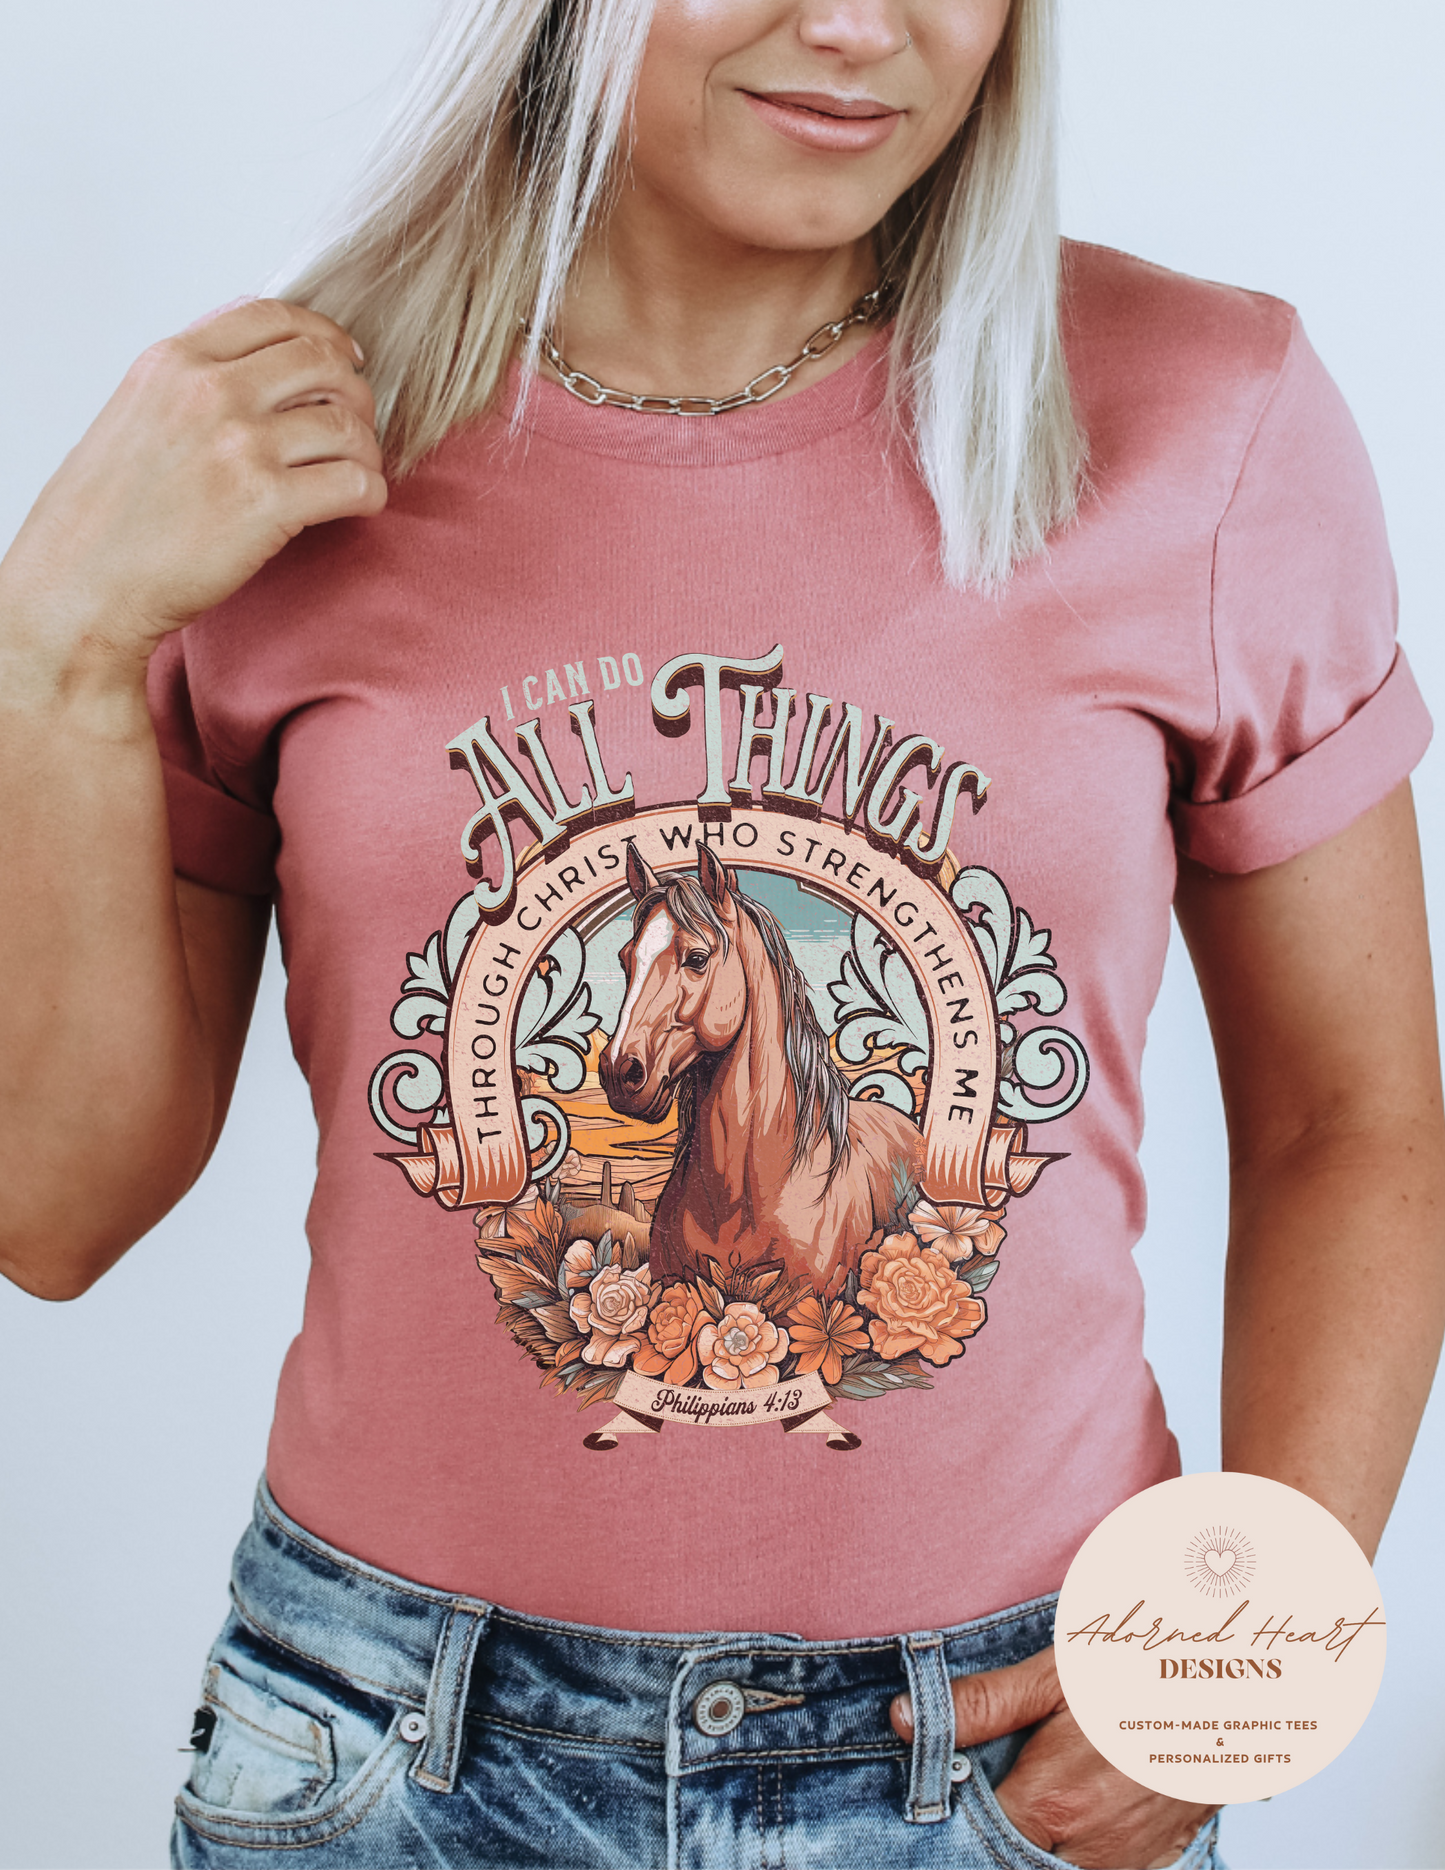 I Can Do All Things Through Christ Western Tee